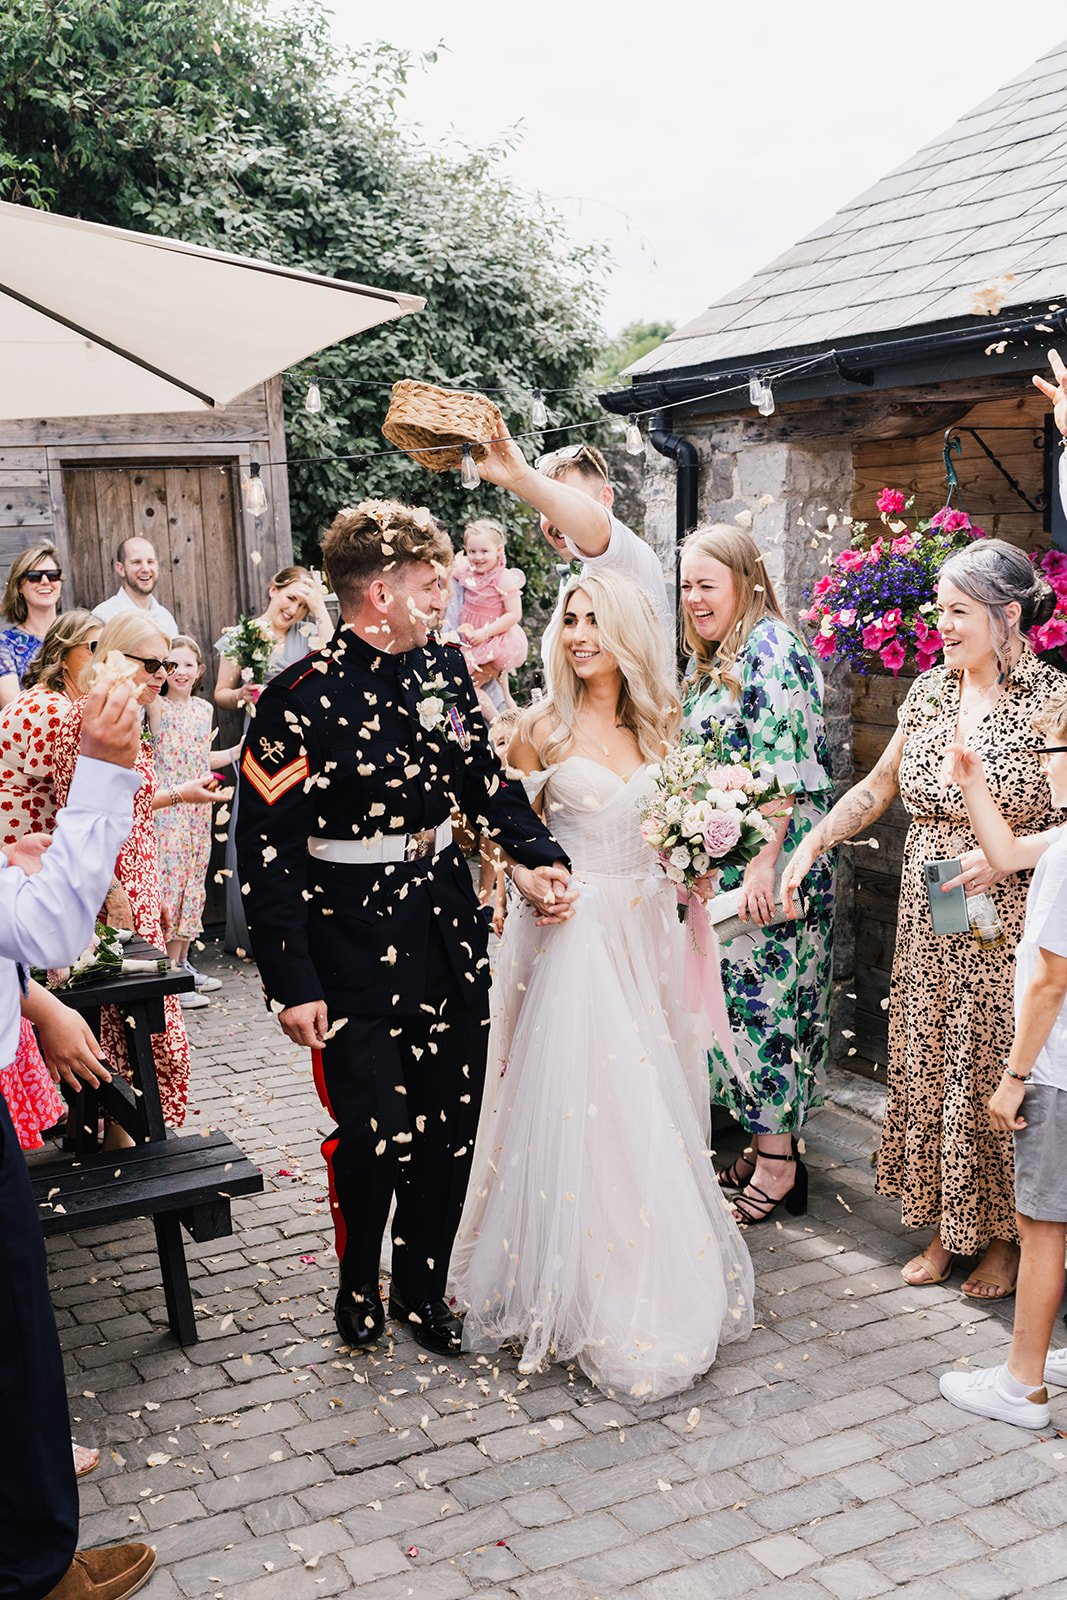  The bride is holding her whimsical, romantic floral bouquet as she walks holding hands with the groom through a shower of confetti, thrown by their wedding guests who are lining the path outside.   Photo by: Oliver Rees Photography 